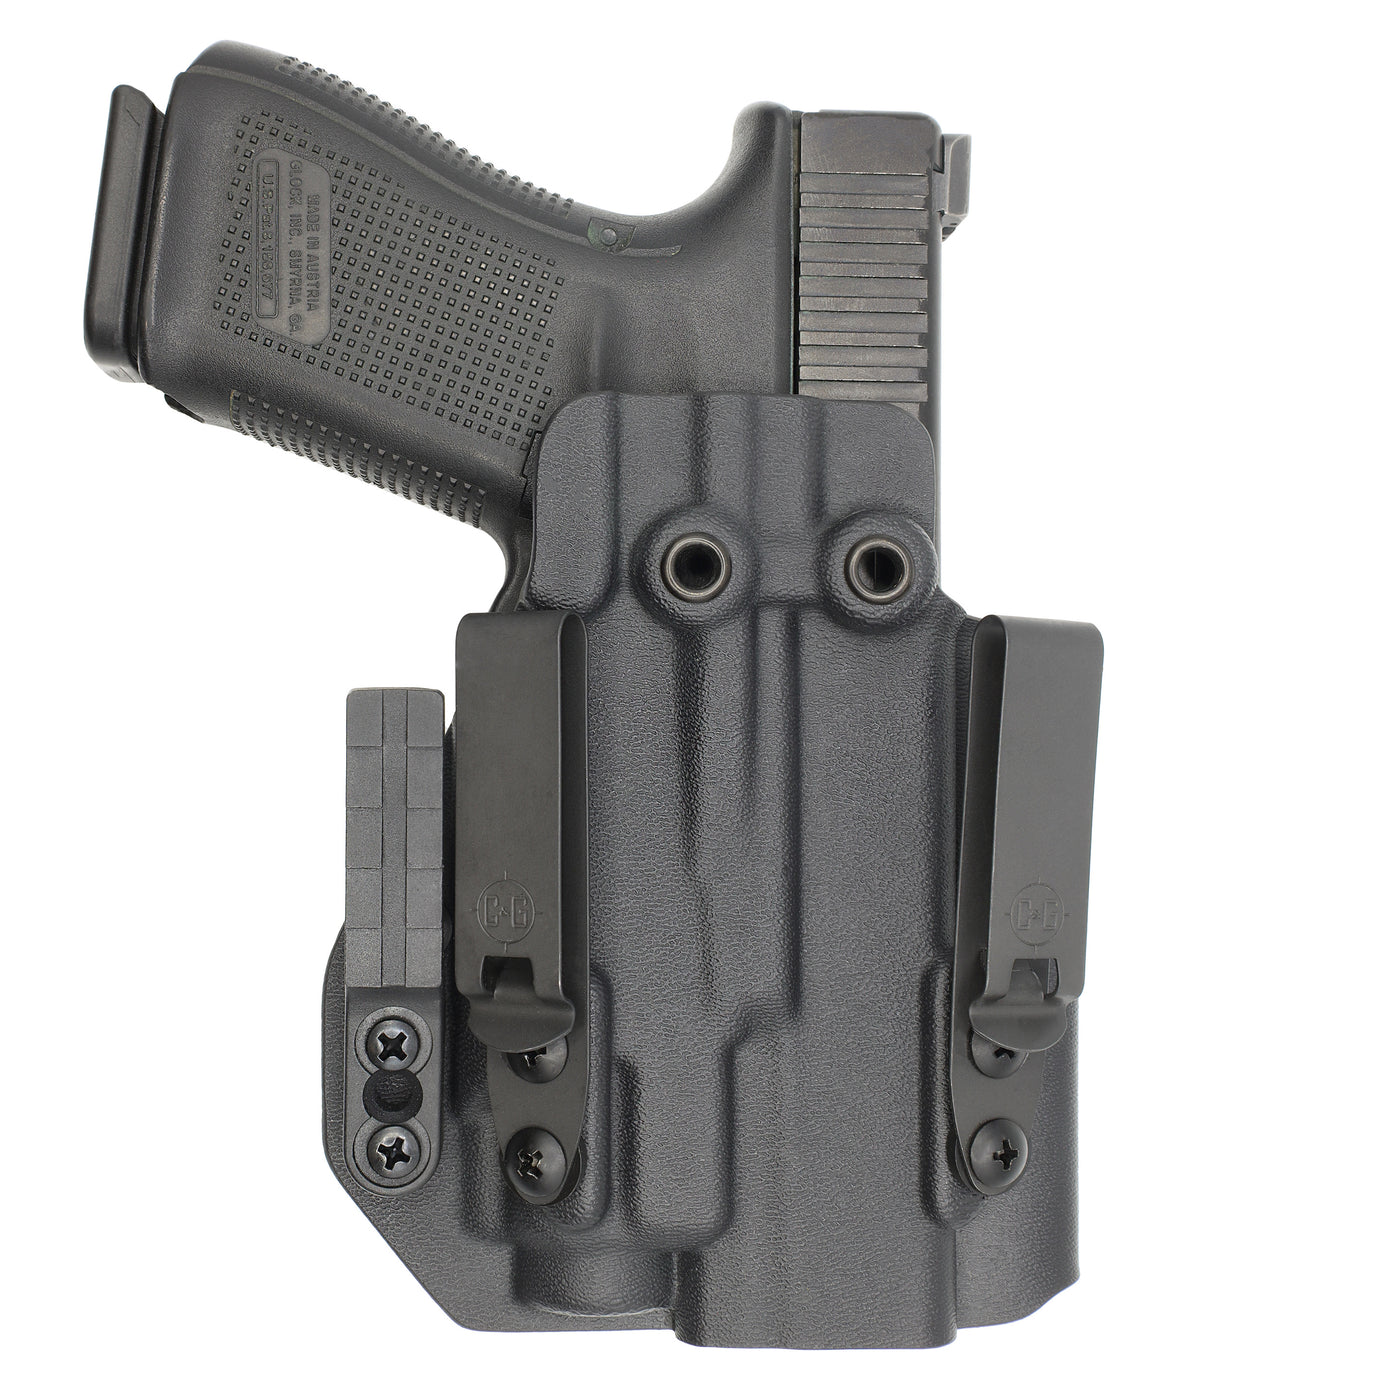 C&G Holsters custom IWB ALPHA UPGRADE Tactical Poly80 streamlight TLR8 holstered